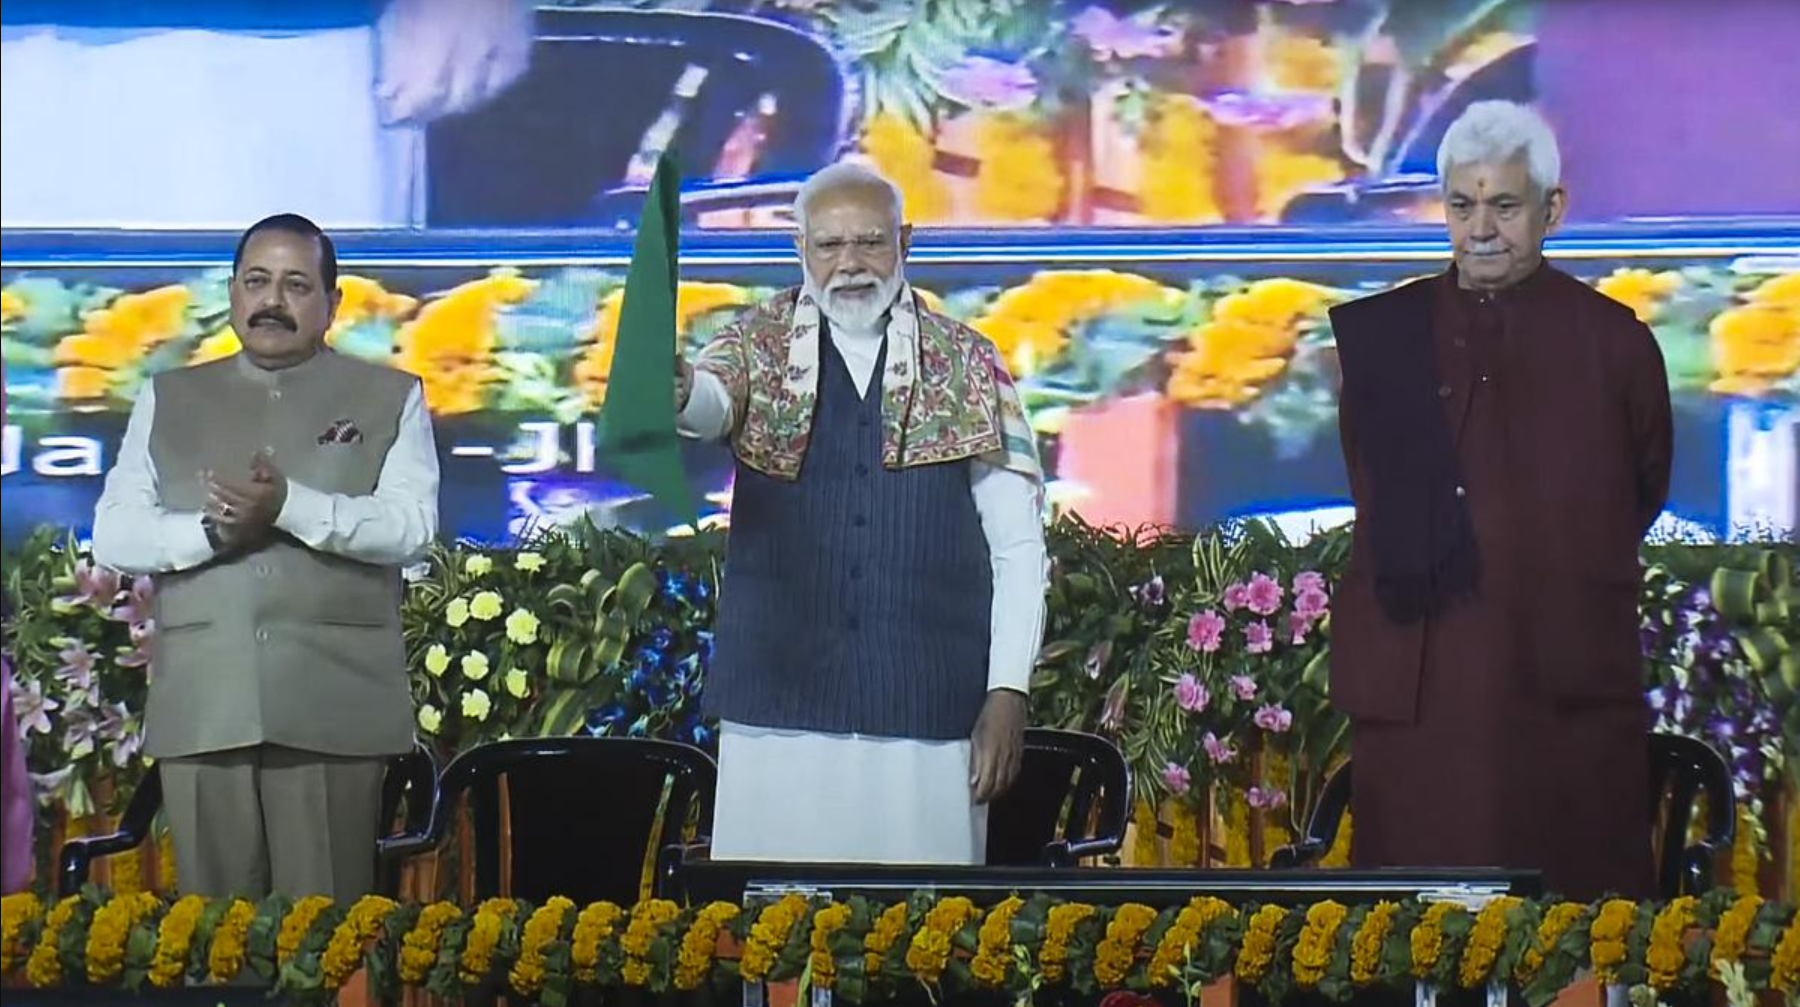 PM Modi inaugurates and lays foundation stone of multiple development projects in Jammu and Kashmir